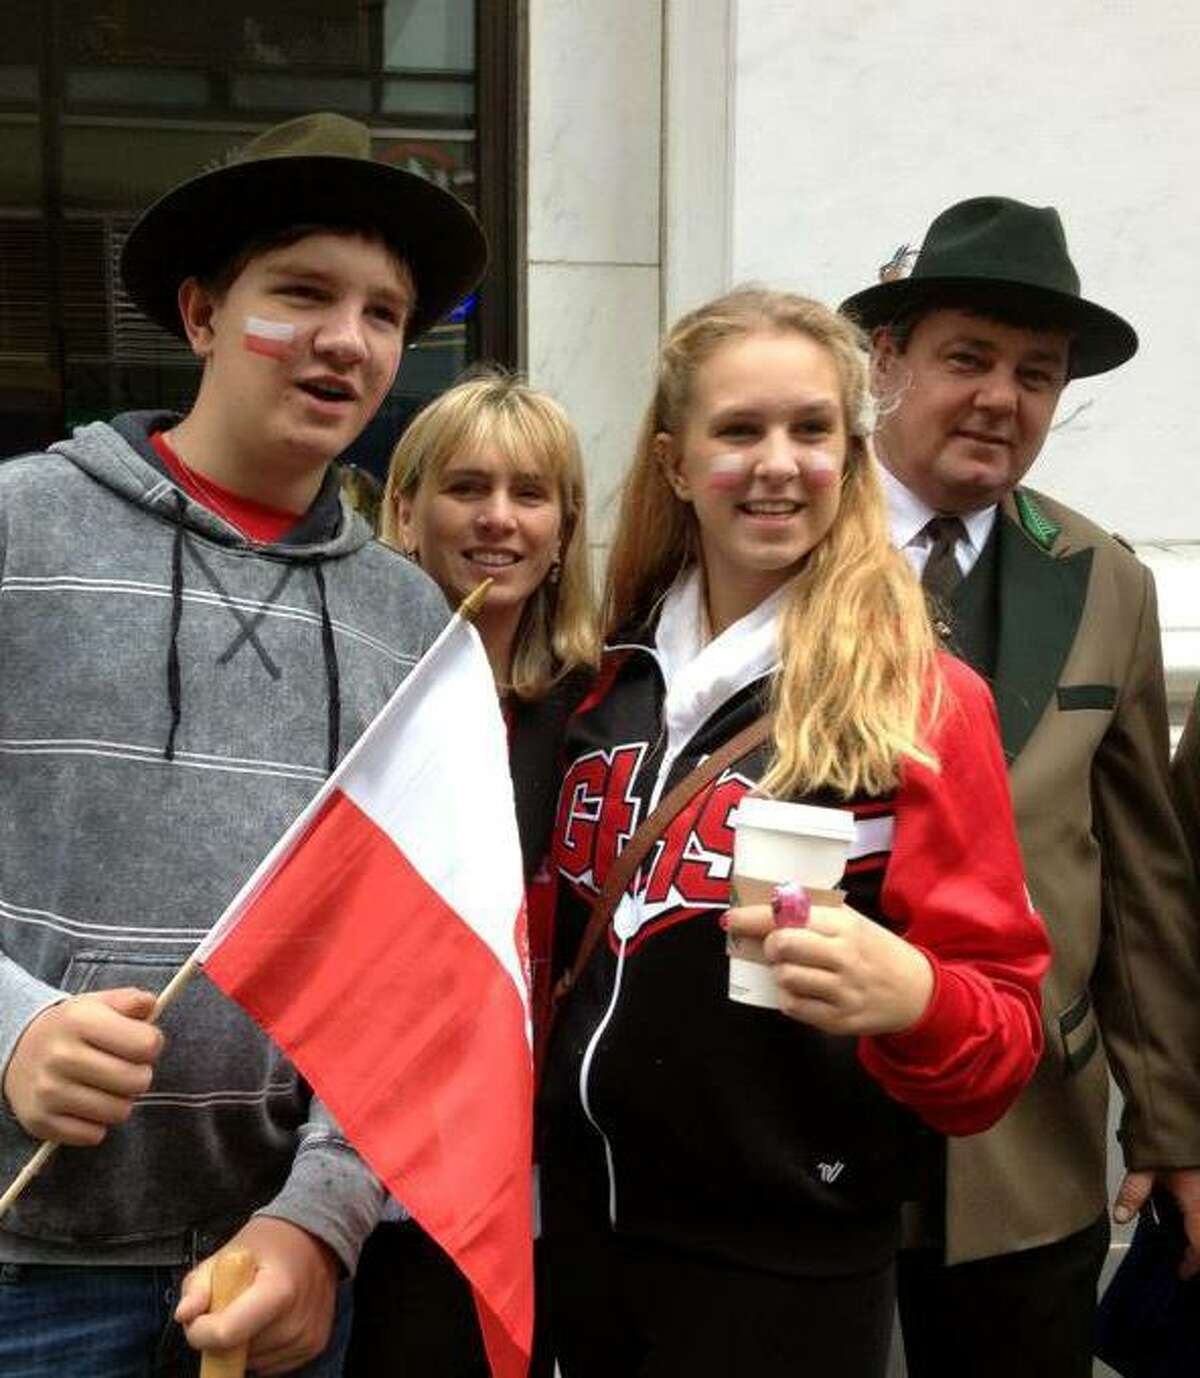 The Palosz family at the 2012 Pulaski Day Parade on Fifth Avenue in New York City on Oct. 12, 2012